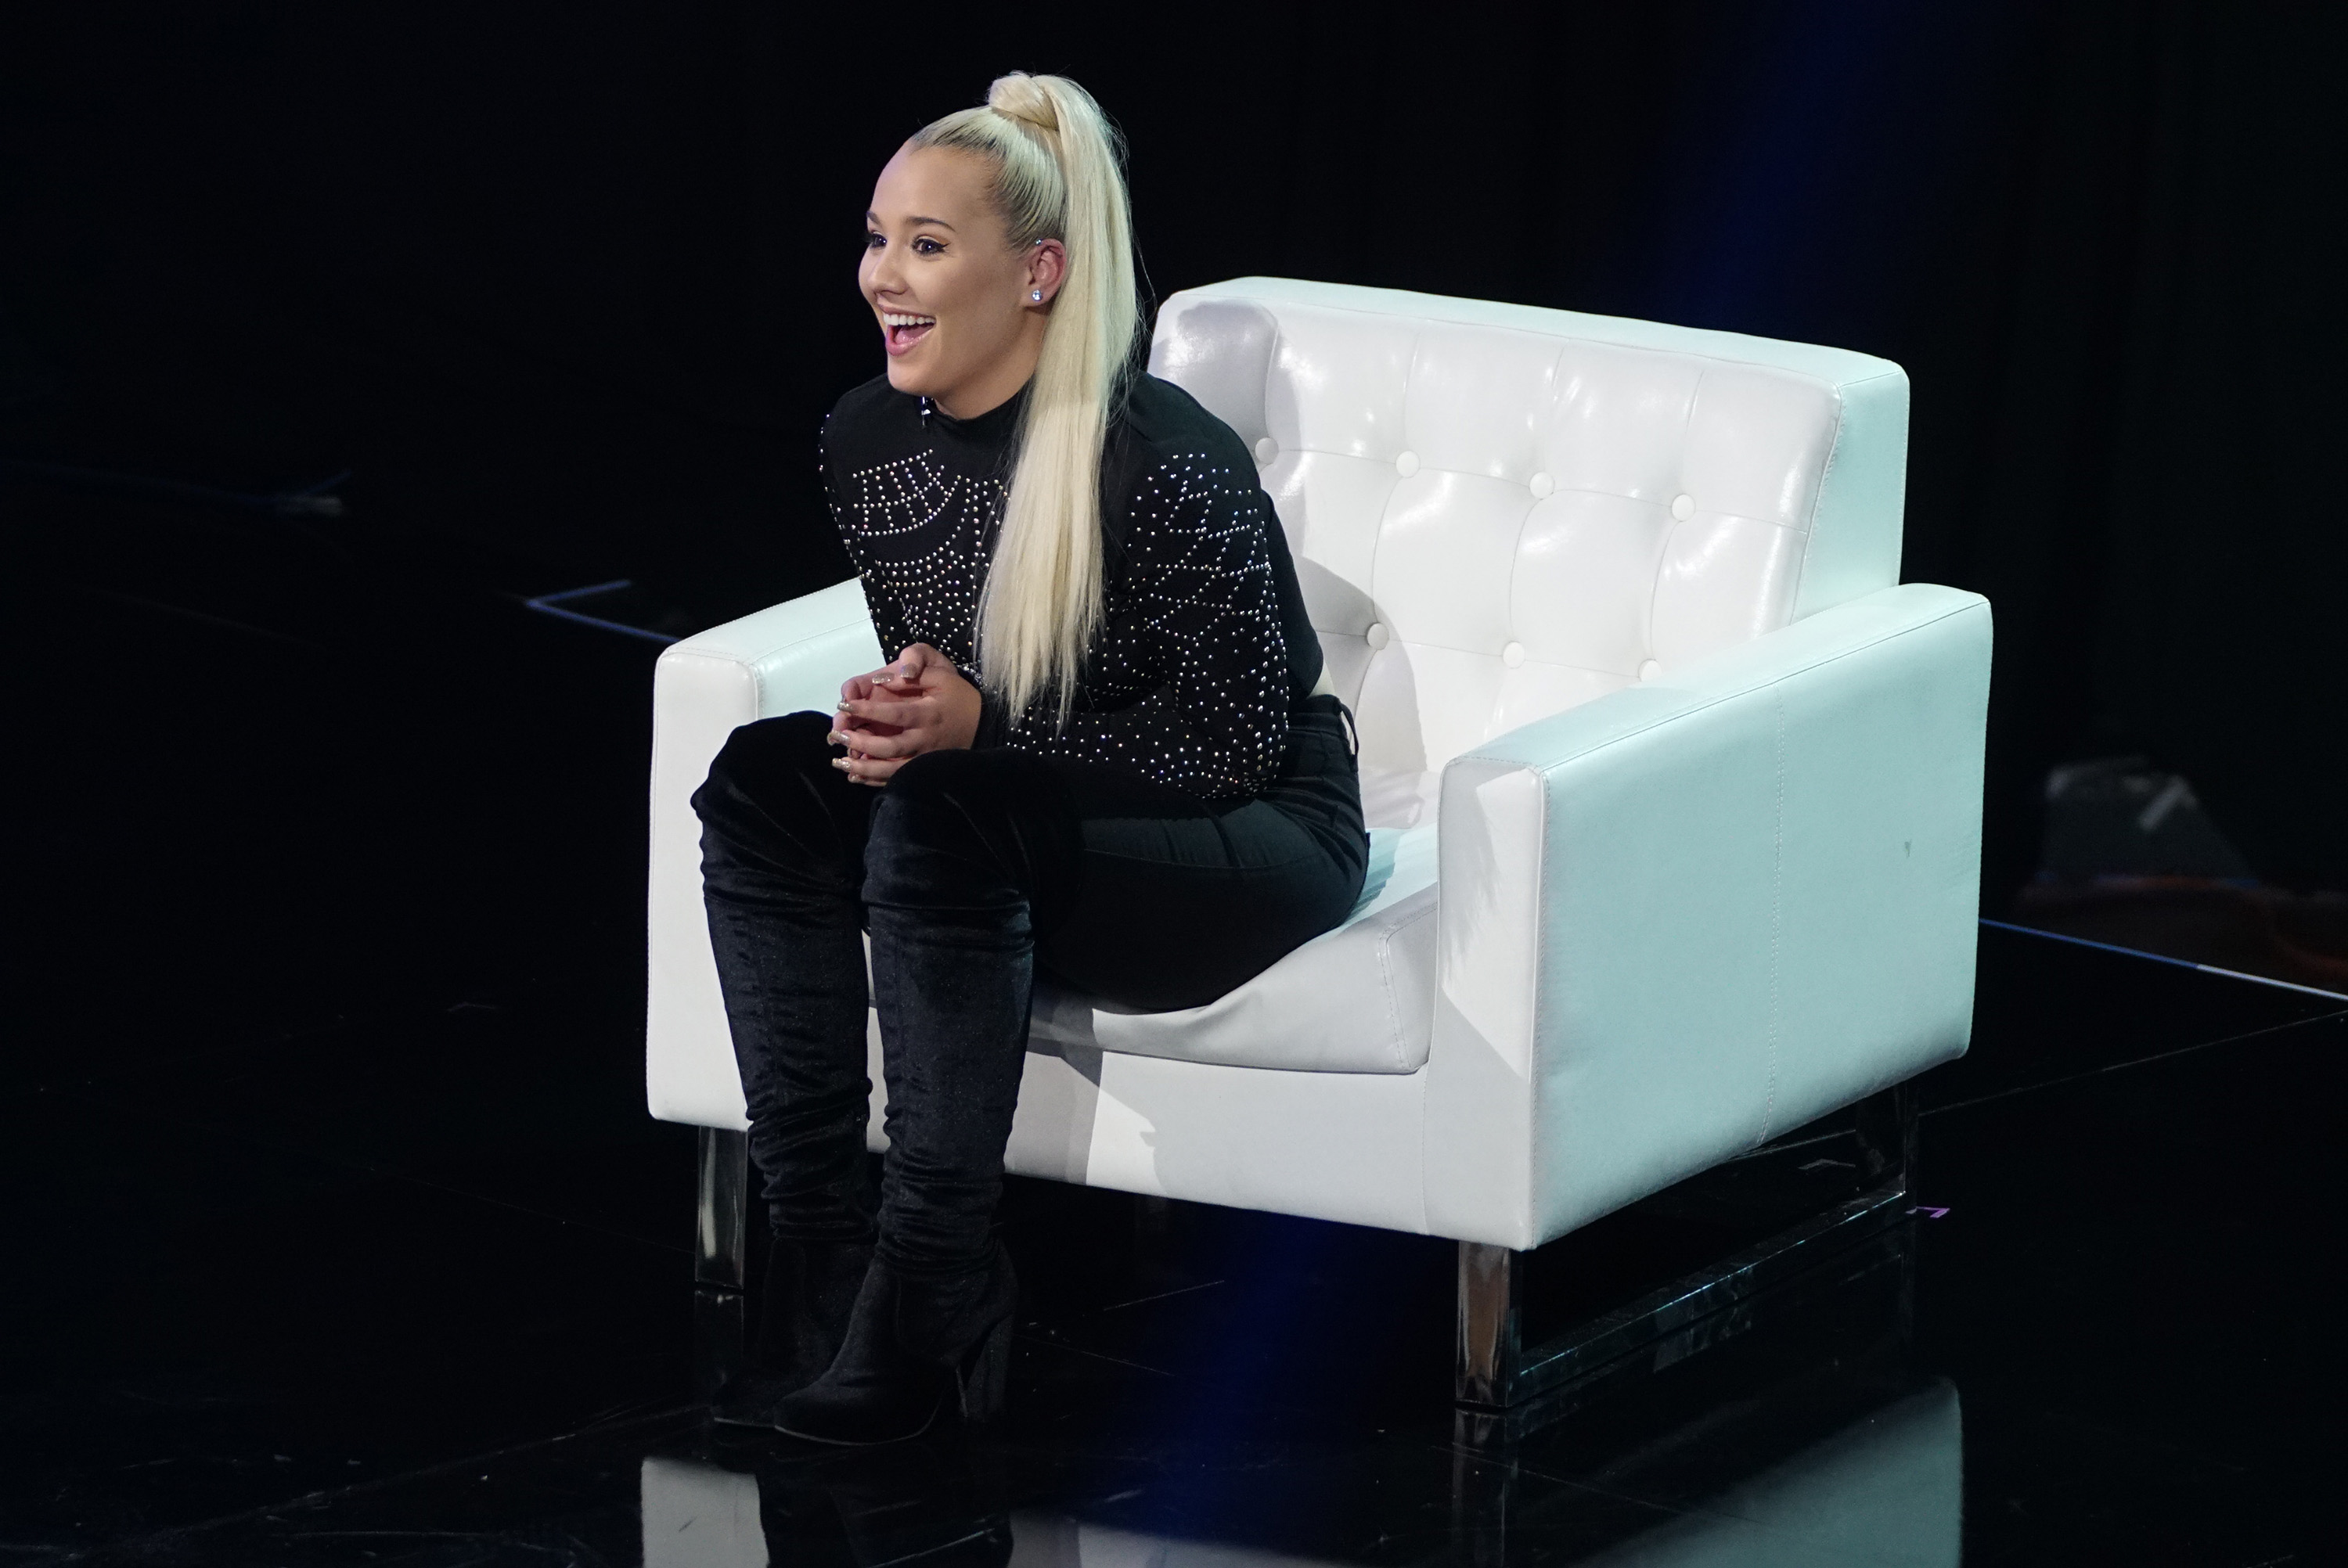 Gabby Barrett on American Idol during the final judgement which aired on ABC on April 2, 2018.
Photo credit: American Idol
